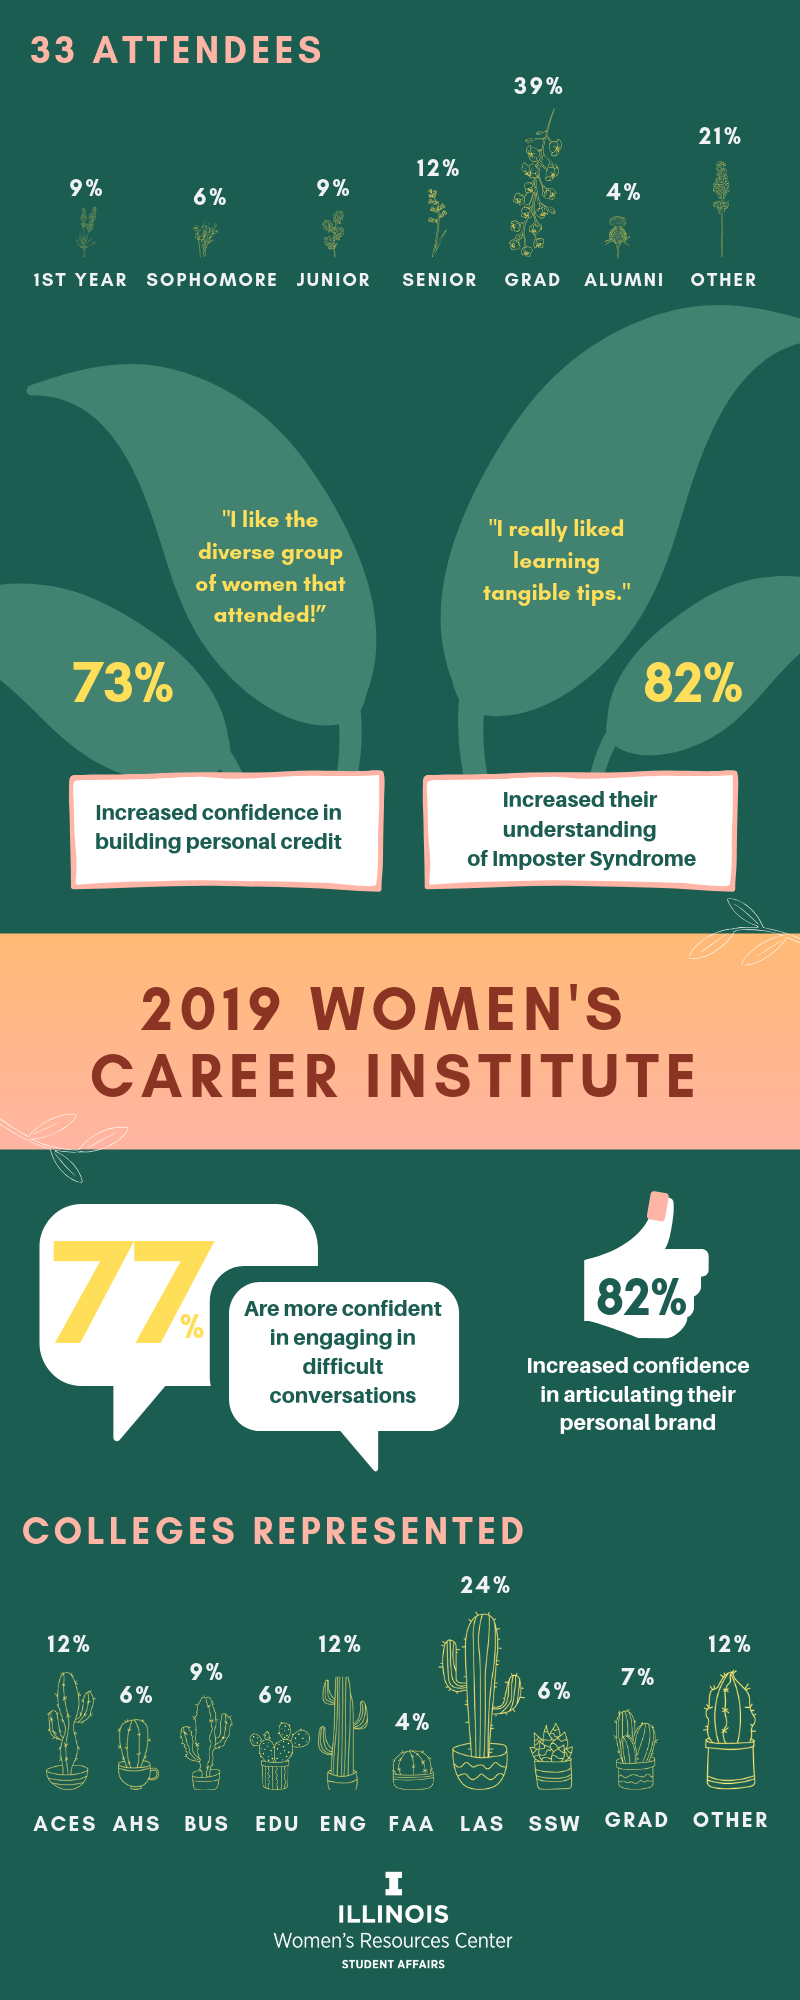 2019 Women's Career Institute infographic poster showing breakdown of attendees and colleges represented using different plant/cacti illustrations and green/pink color theme